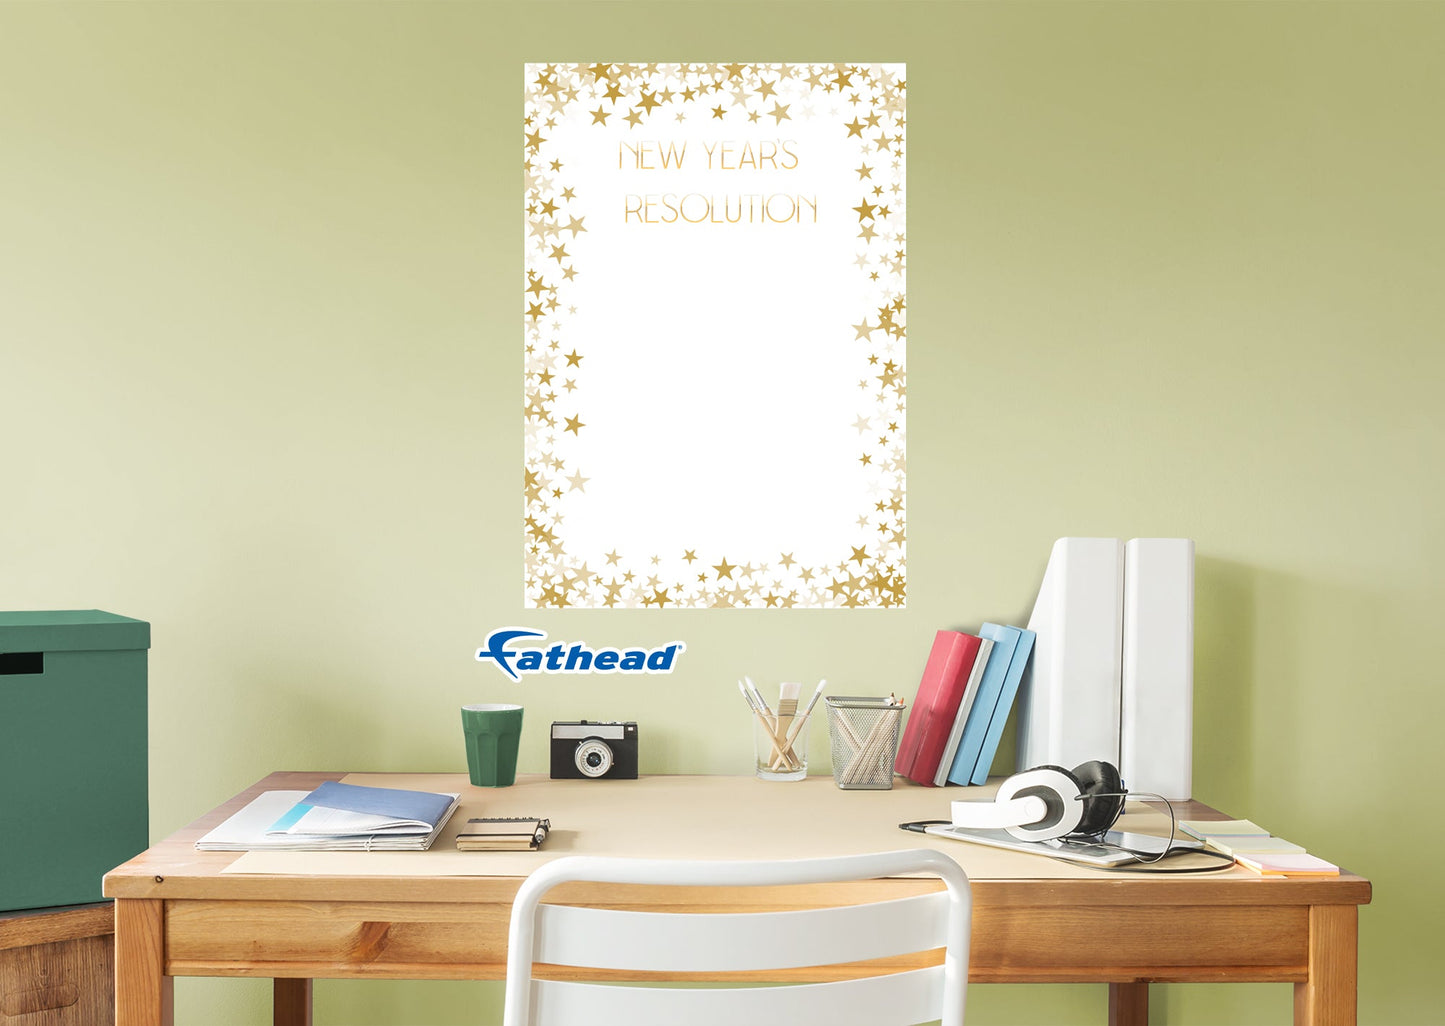 New Year: Little Stars Dry Erase - Removable Adhesive Decal